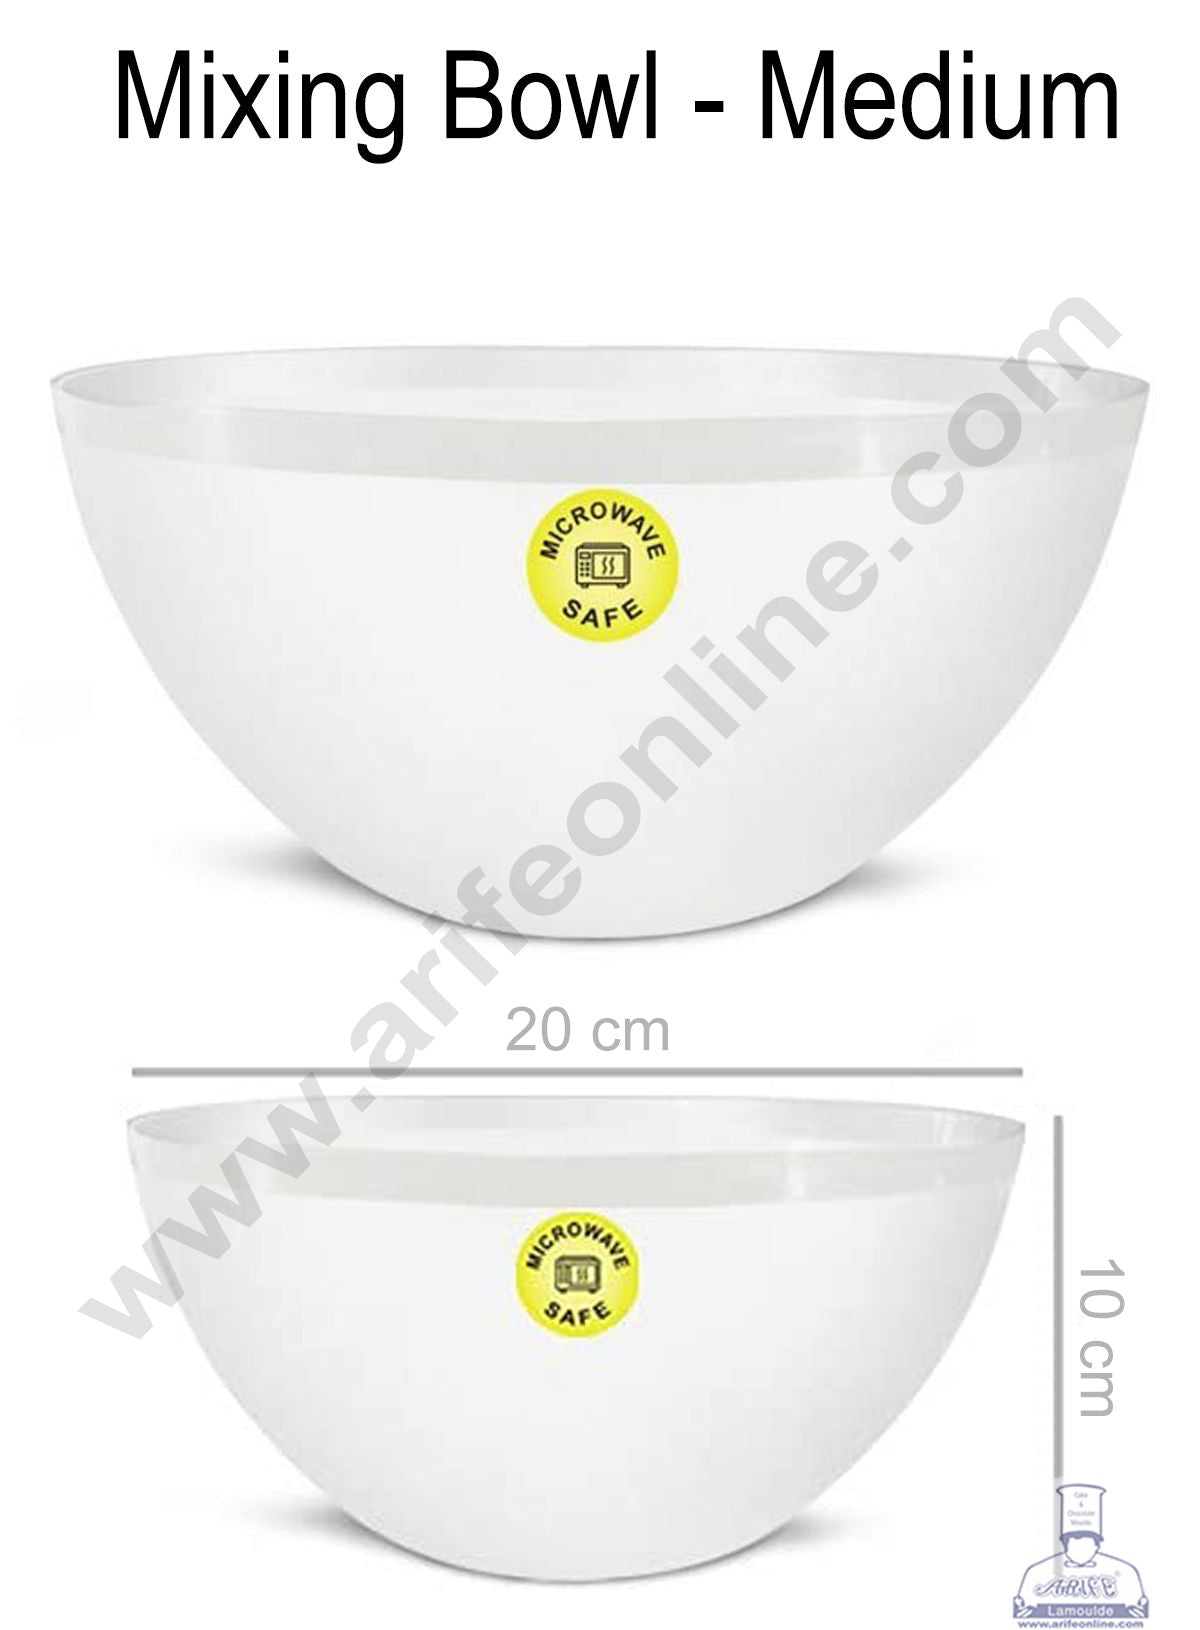 Cook with Color Mixing Bowls with TPR Lids - 12 Piece Plastic Nesting Bowls  Set includes 6 Prep Bowls and 6 Lids - Walmart.com